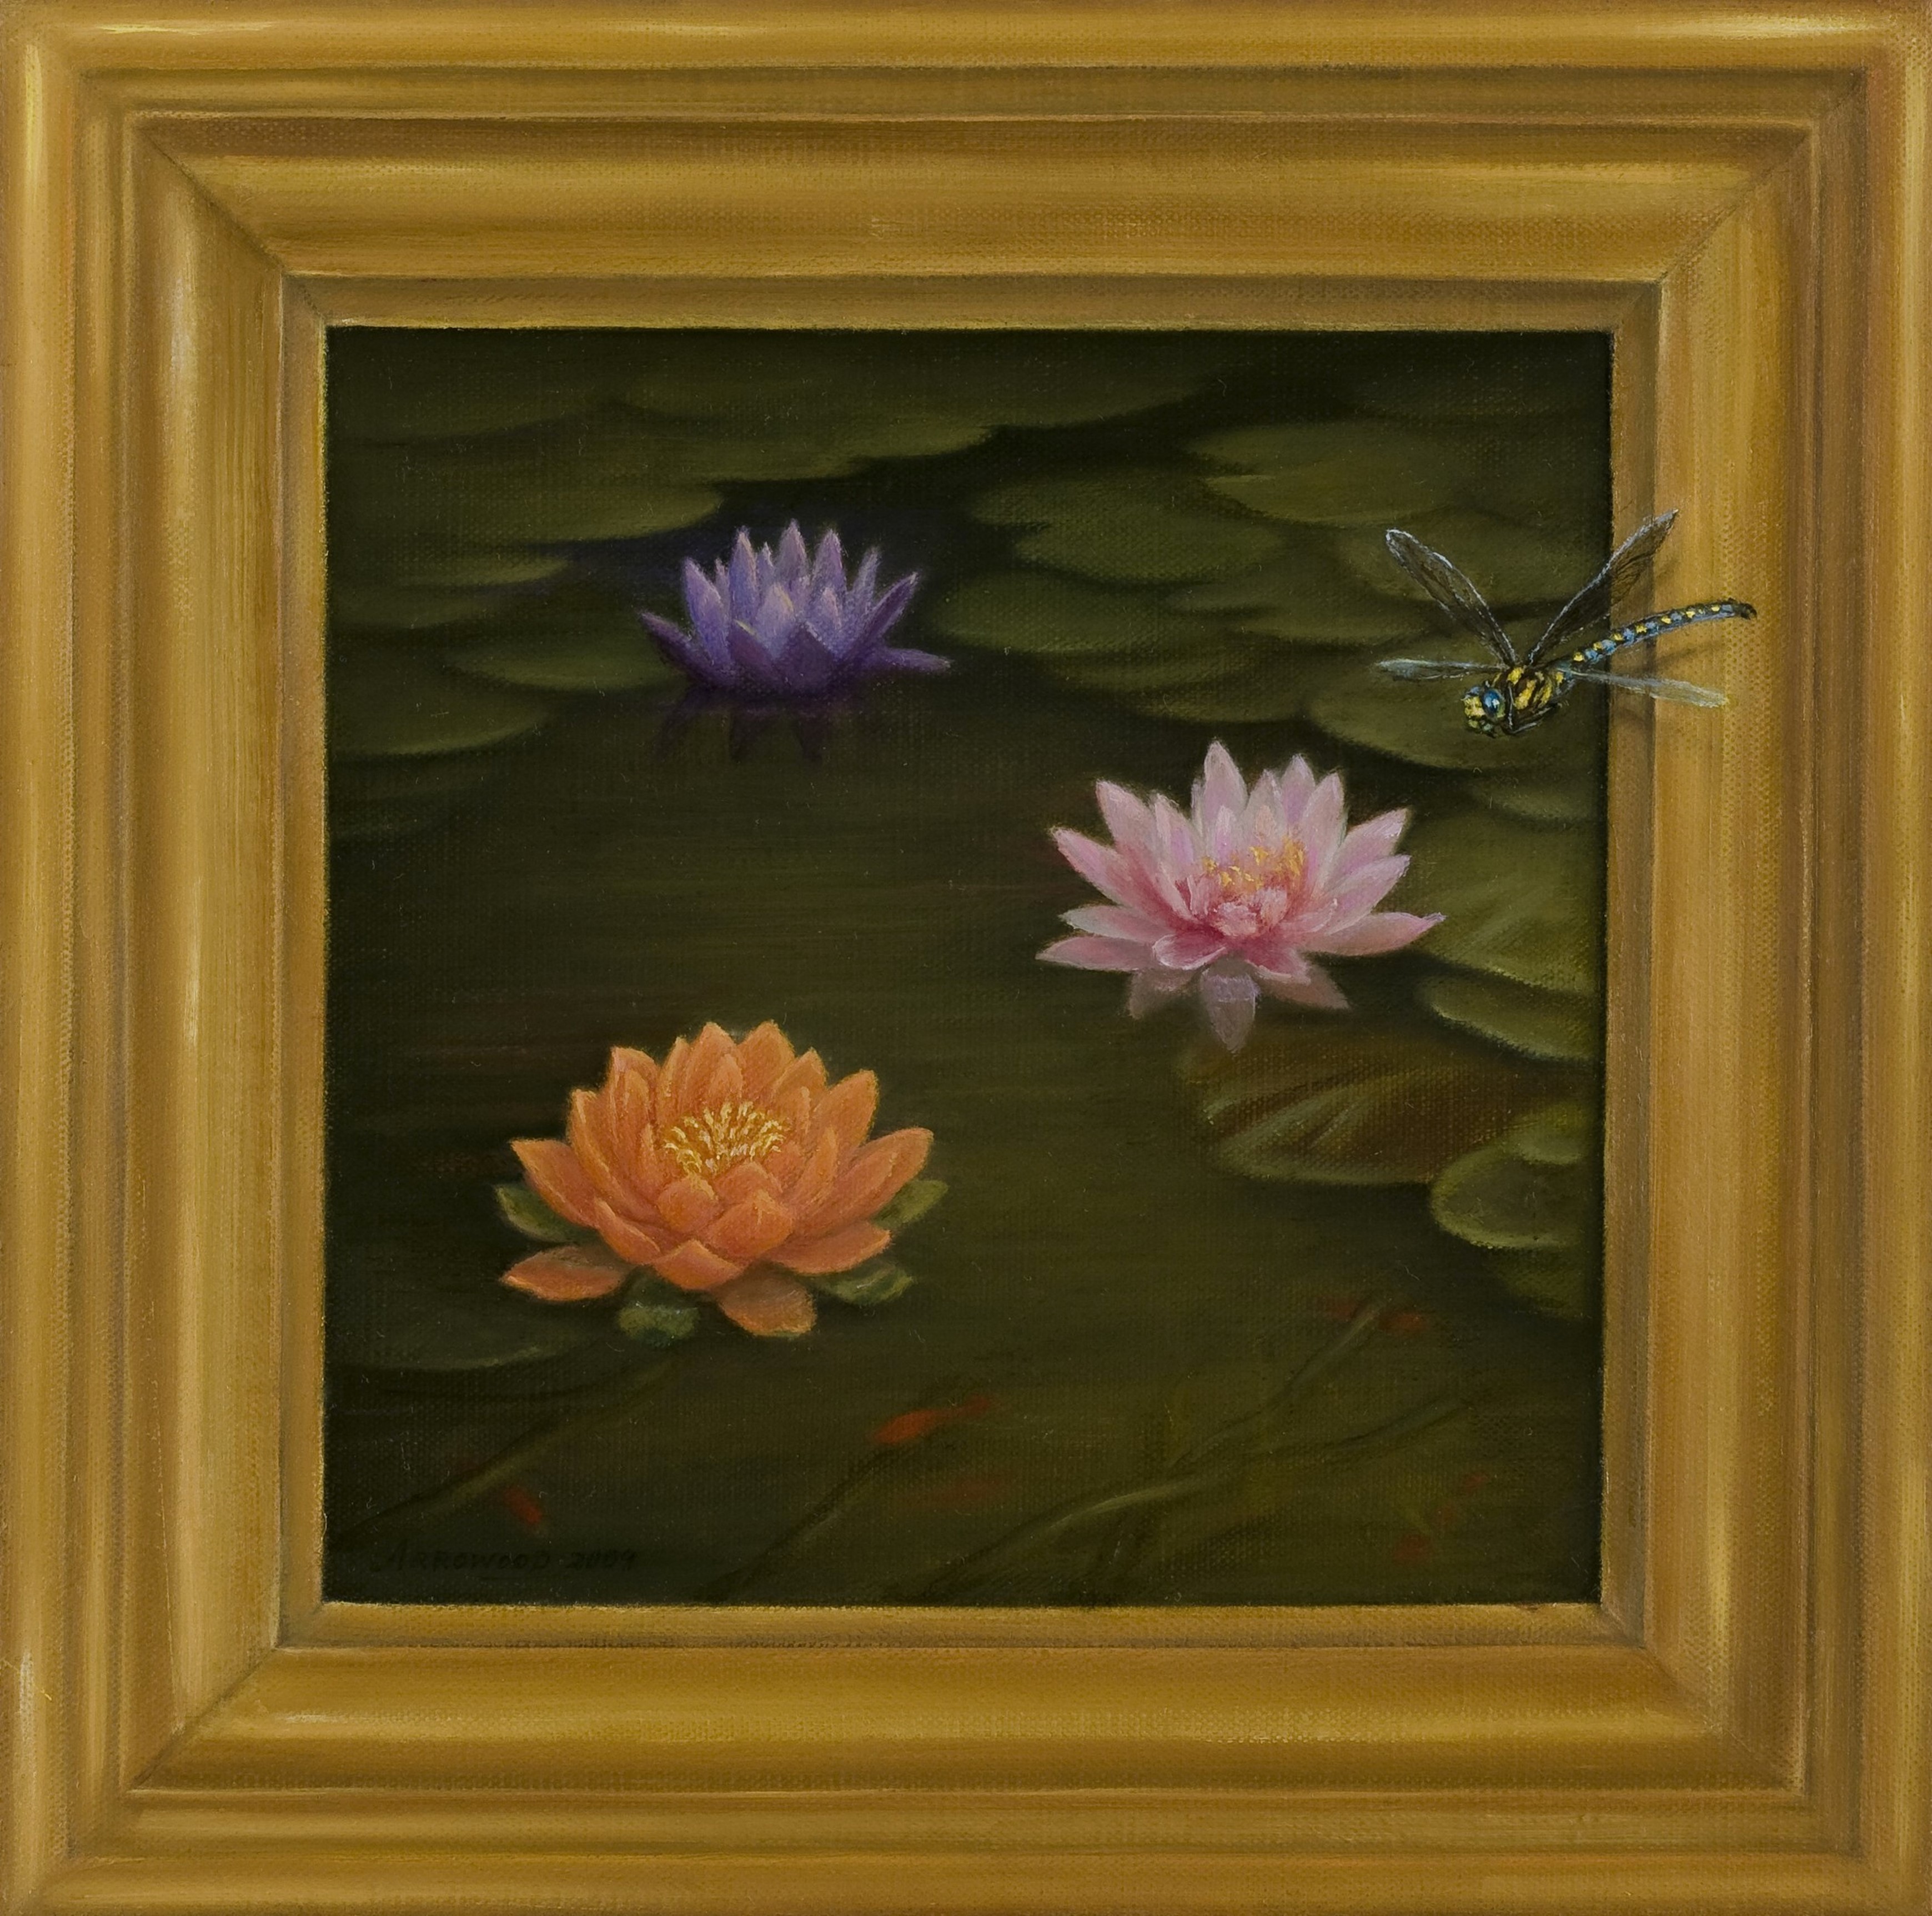 A Flight Illusion Oil on Canvas 2009 by Yvonne Herd Arrowood